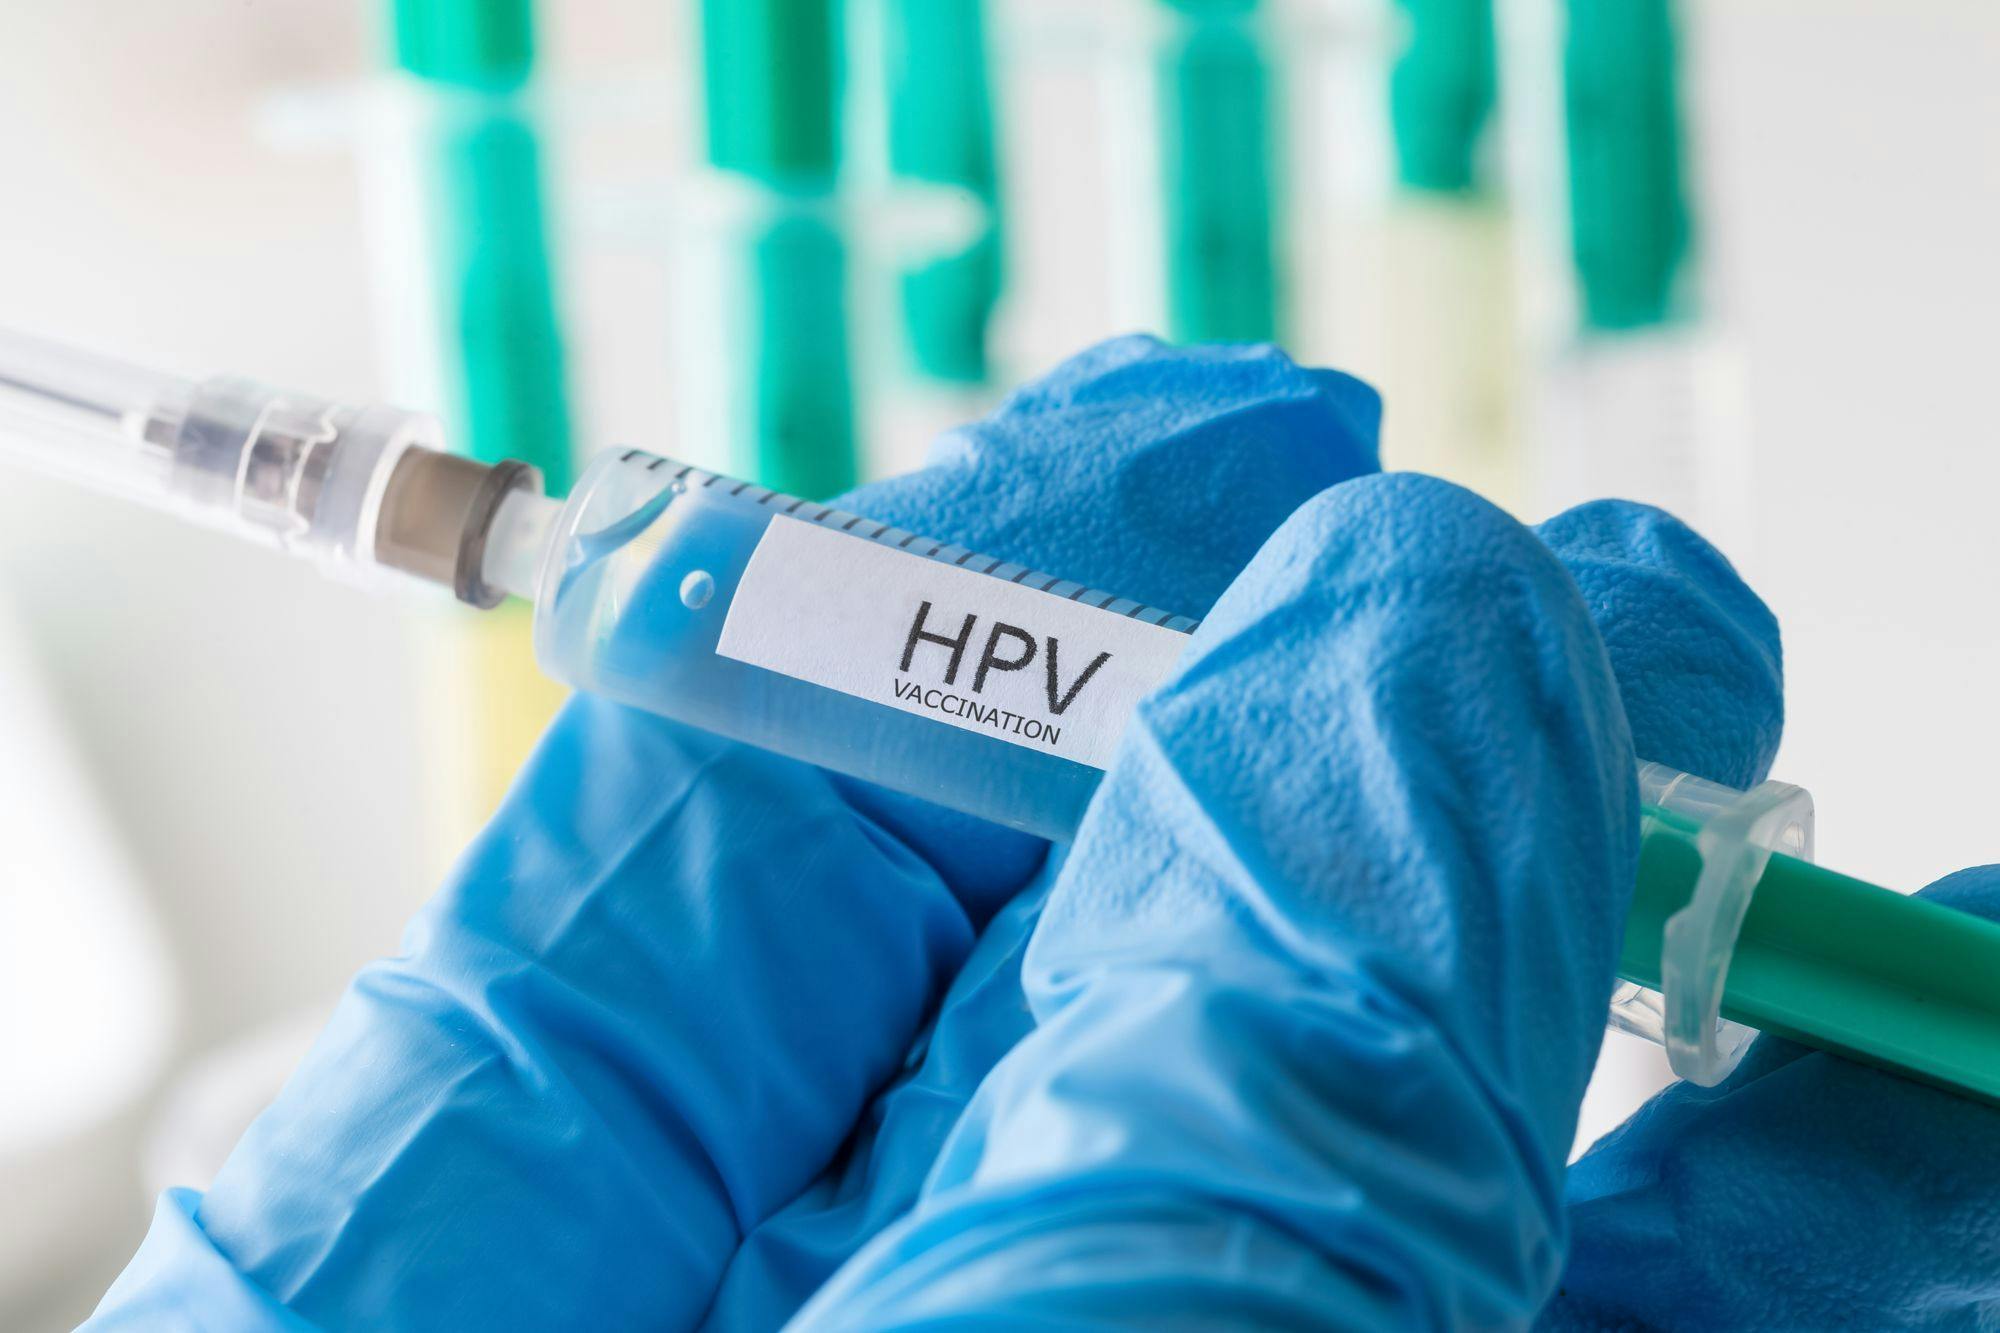 St. Jude Children’s Research Hospital Calls for More HPV Vaccinations